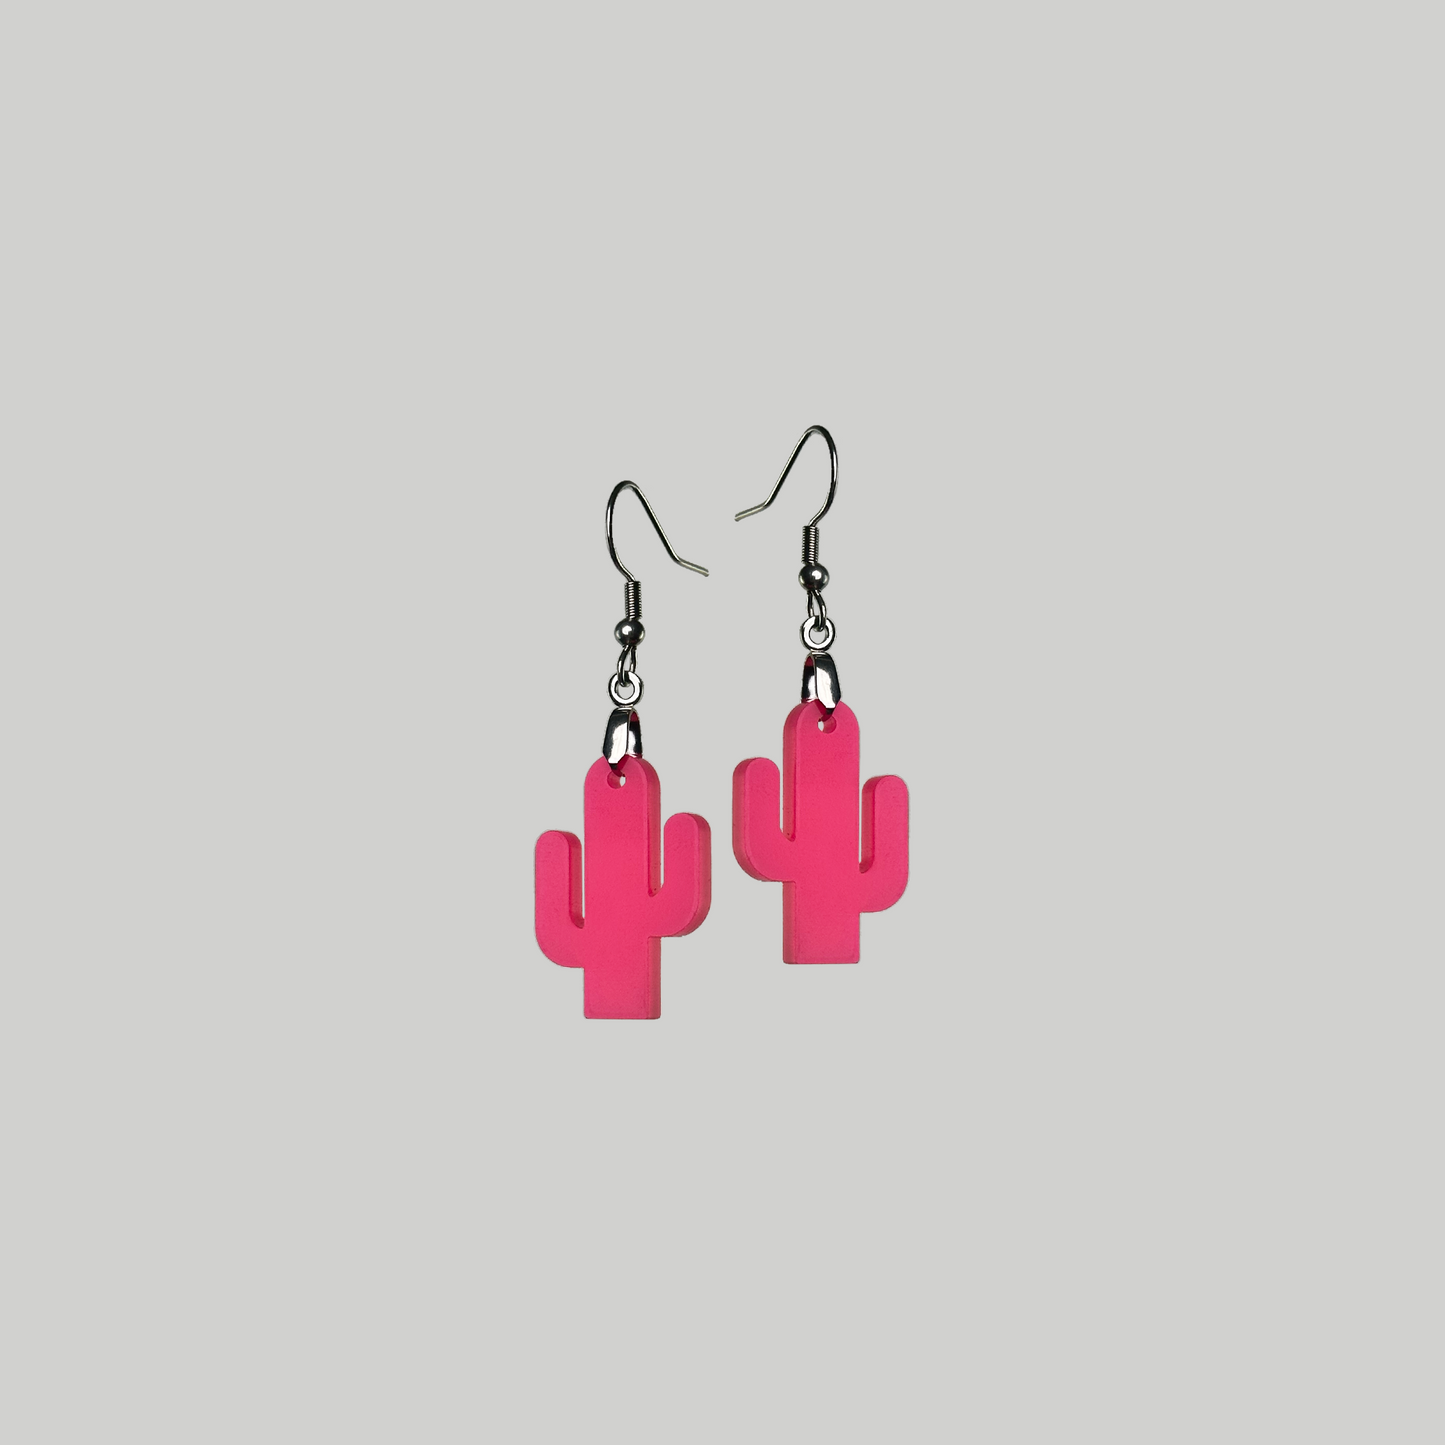 Prickly Cactus Elegance: Unique cactus earrings, carefully crafted to add a hint of desert allure to your accessory collection.